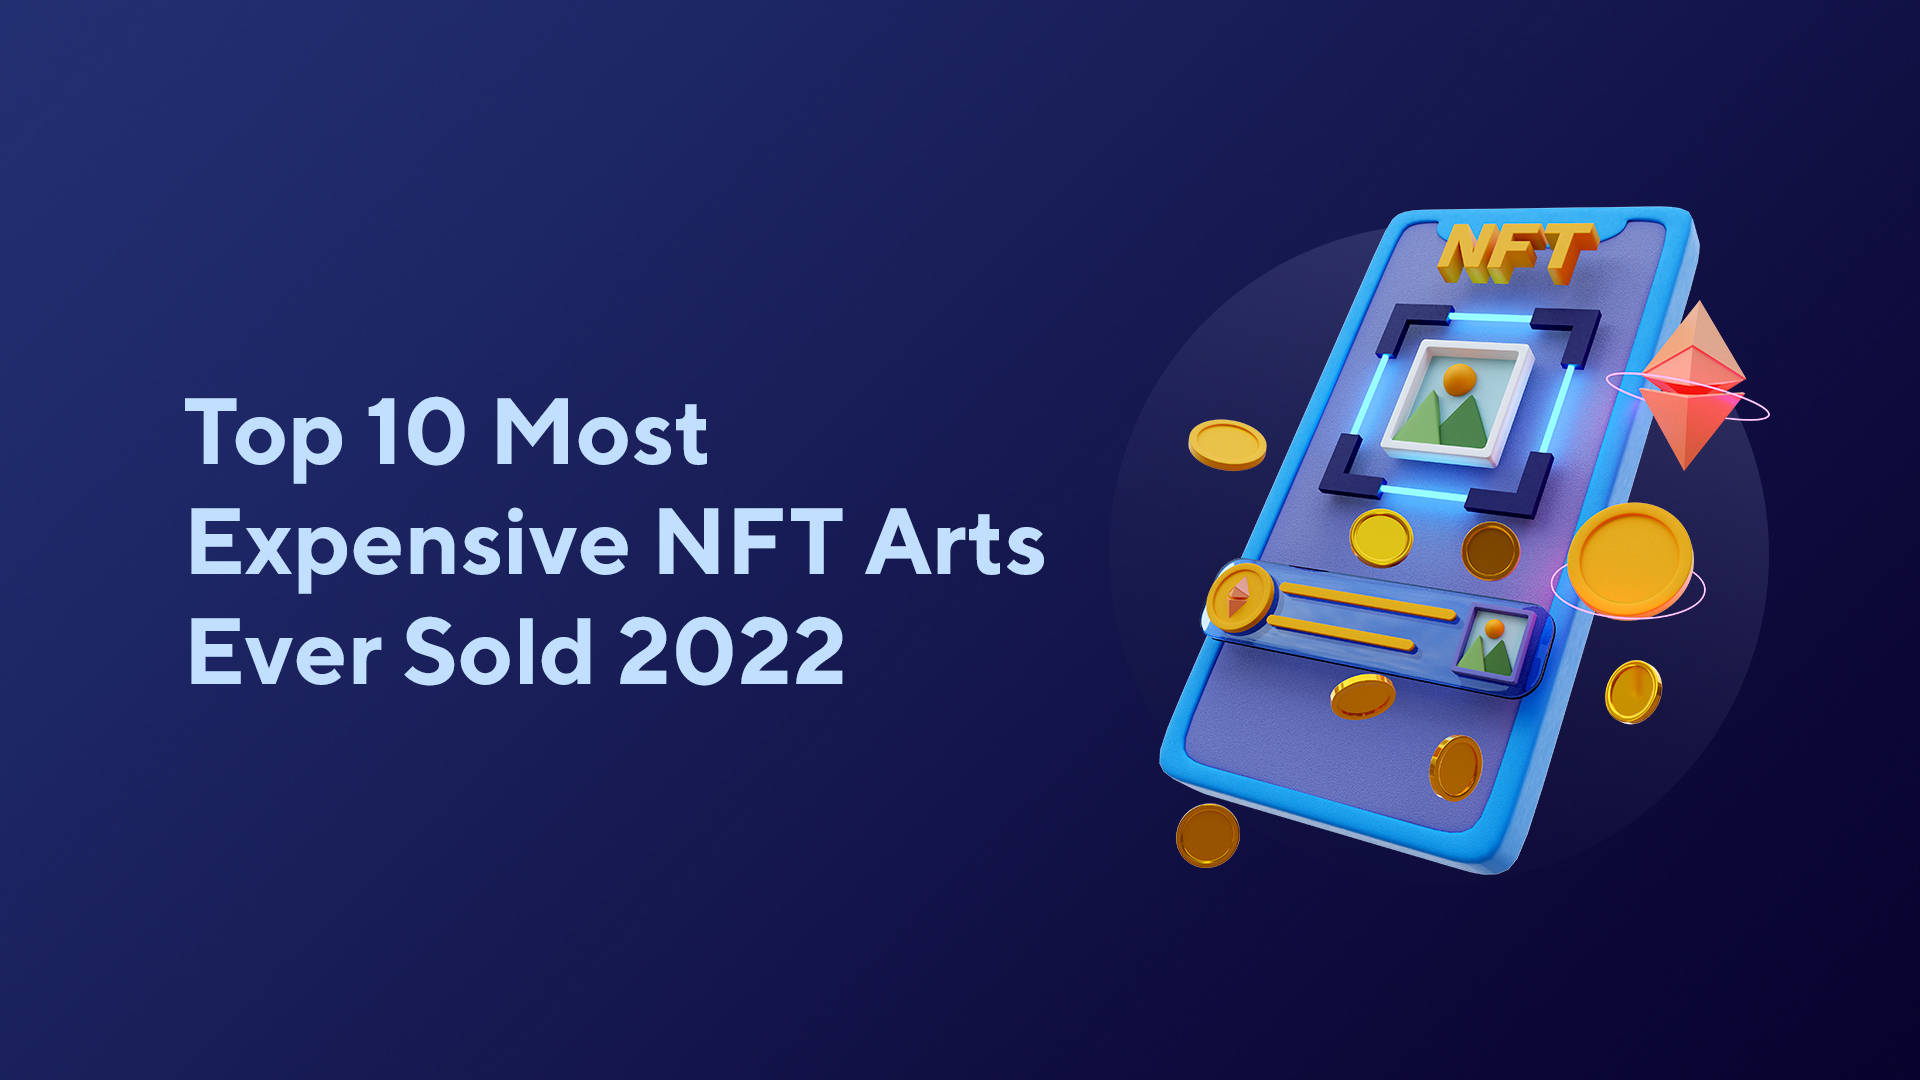 Top 10 Most Expensive NFT Arts Ever Sold 2022